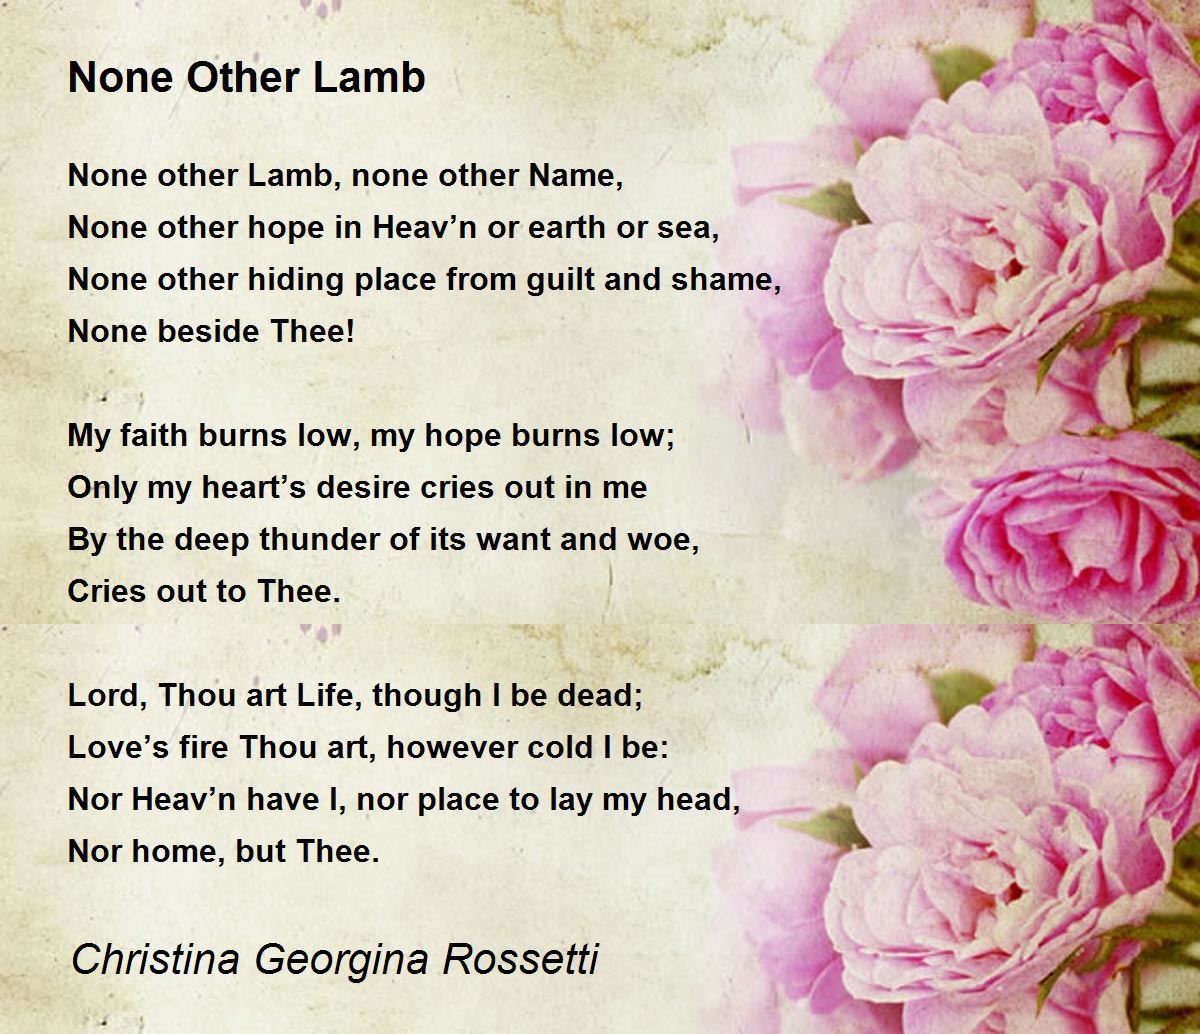 None Other Lamb by Christina Georgina Rossetti - None Other Lamb Poem